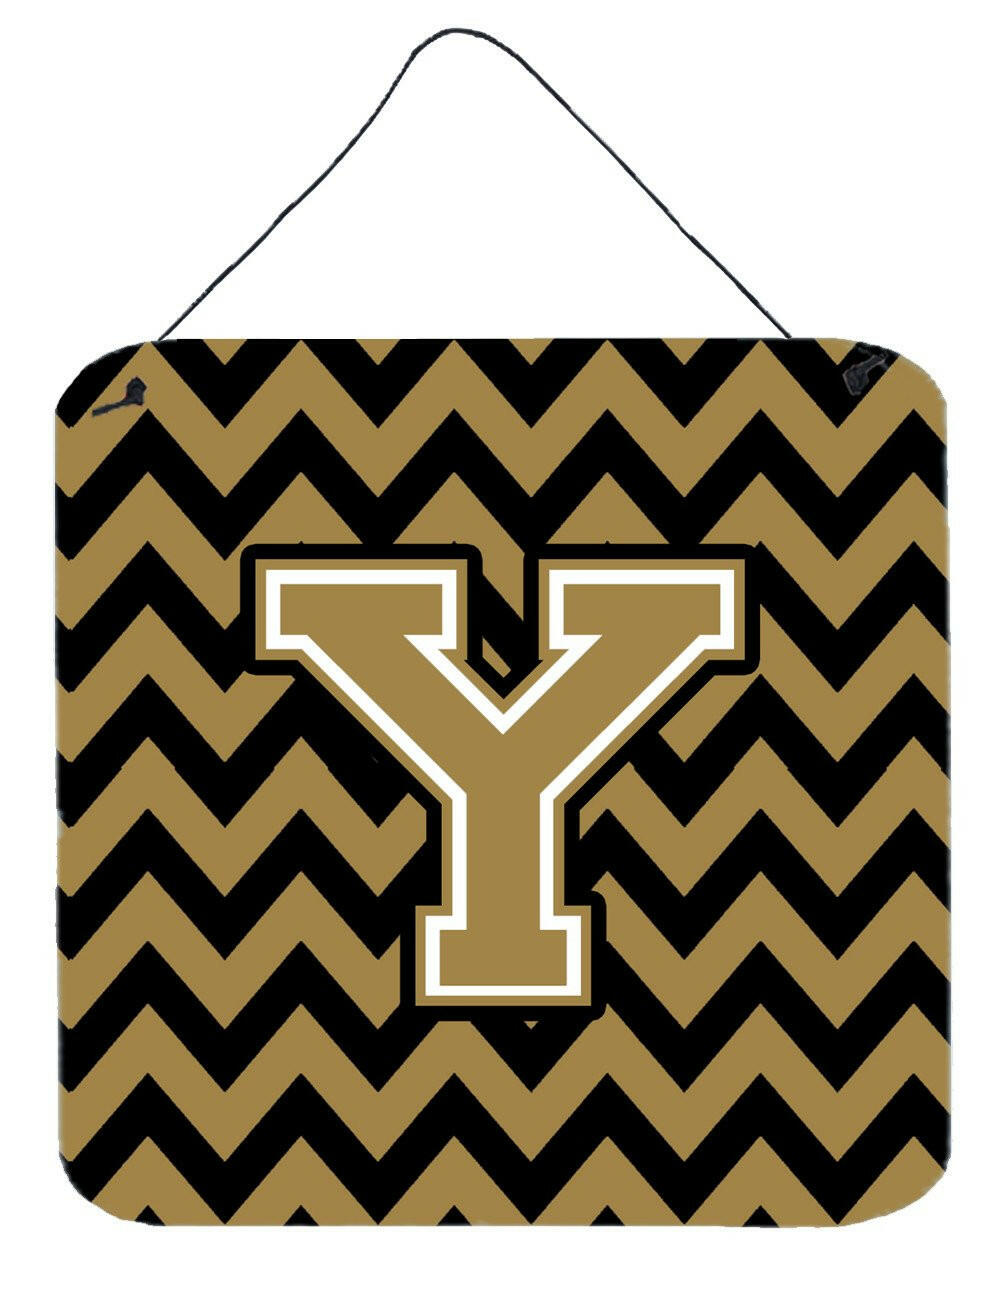 Letter Y Chevron Black and Gold  Wall or Door Hanging Prints CJ1050-YDS66 by Caroline's Treasures